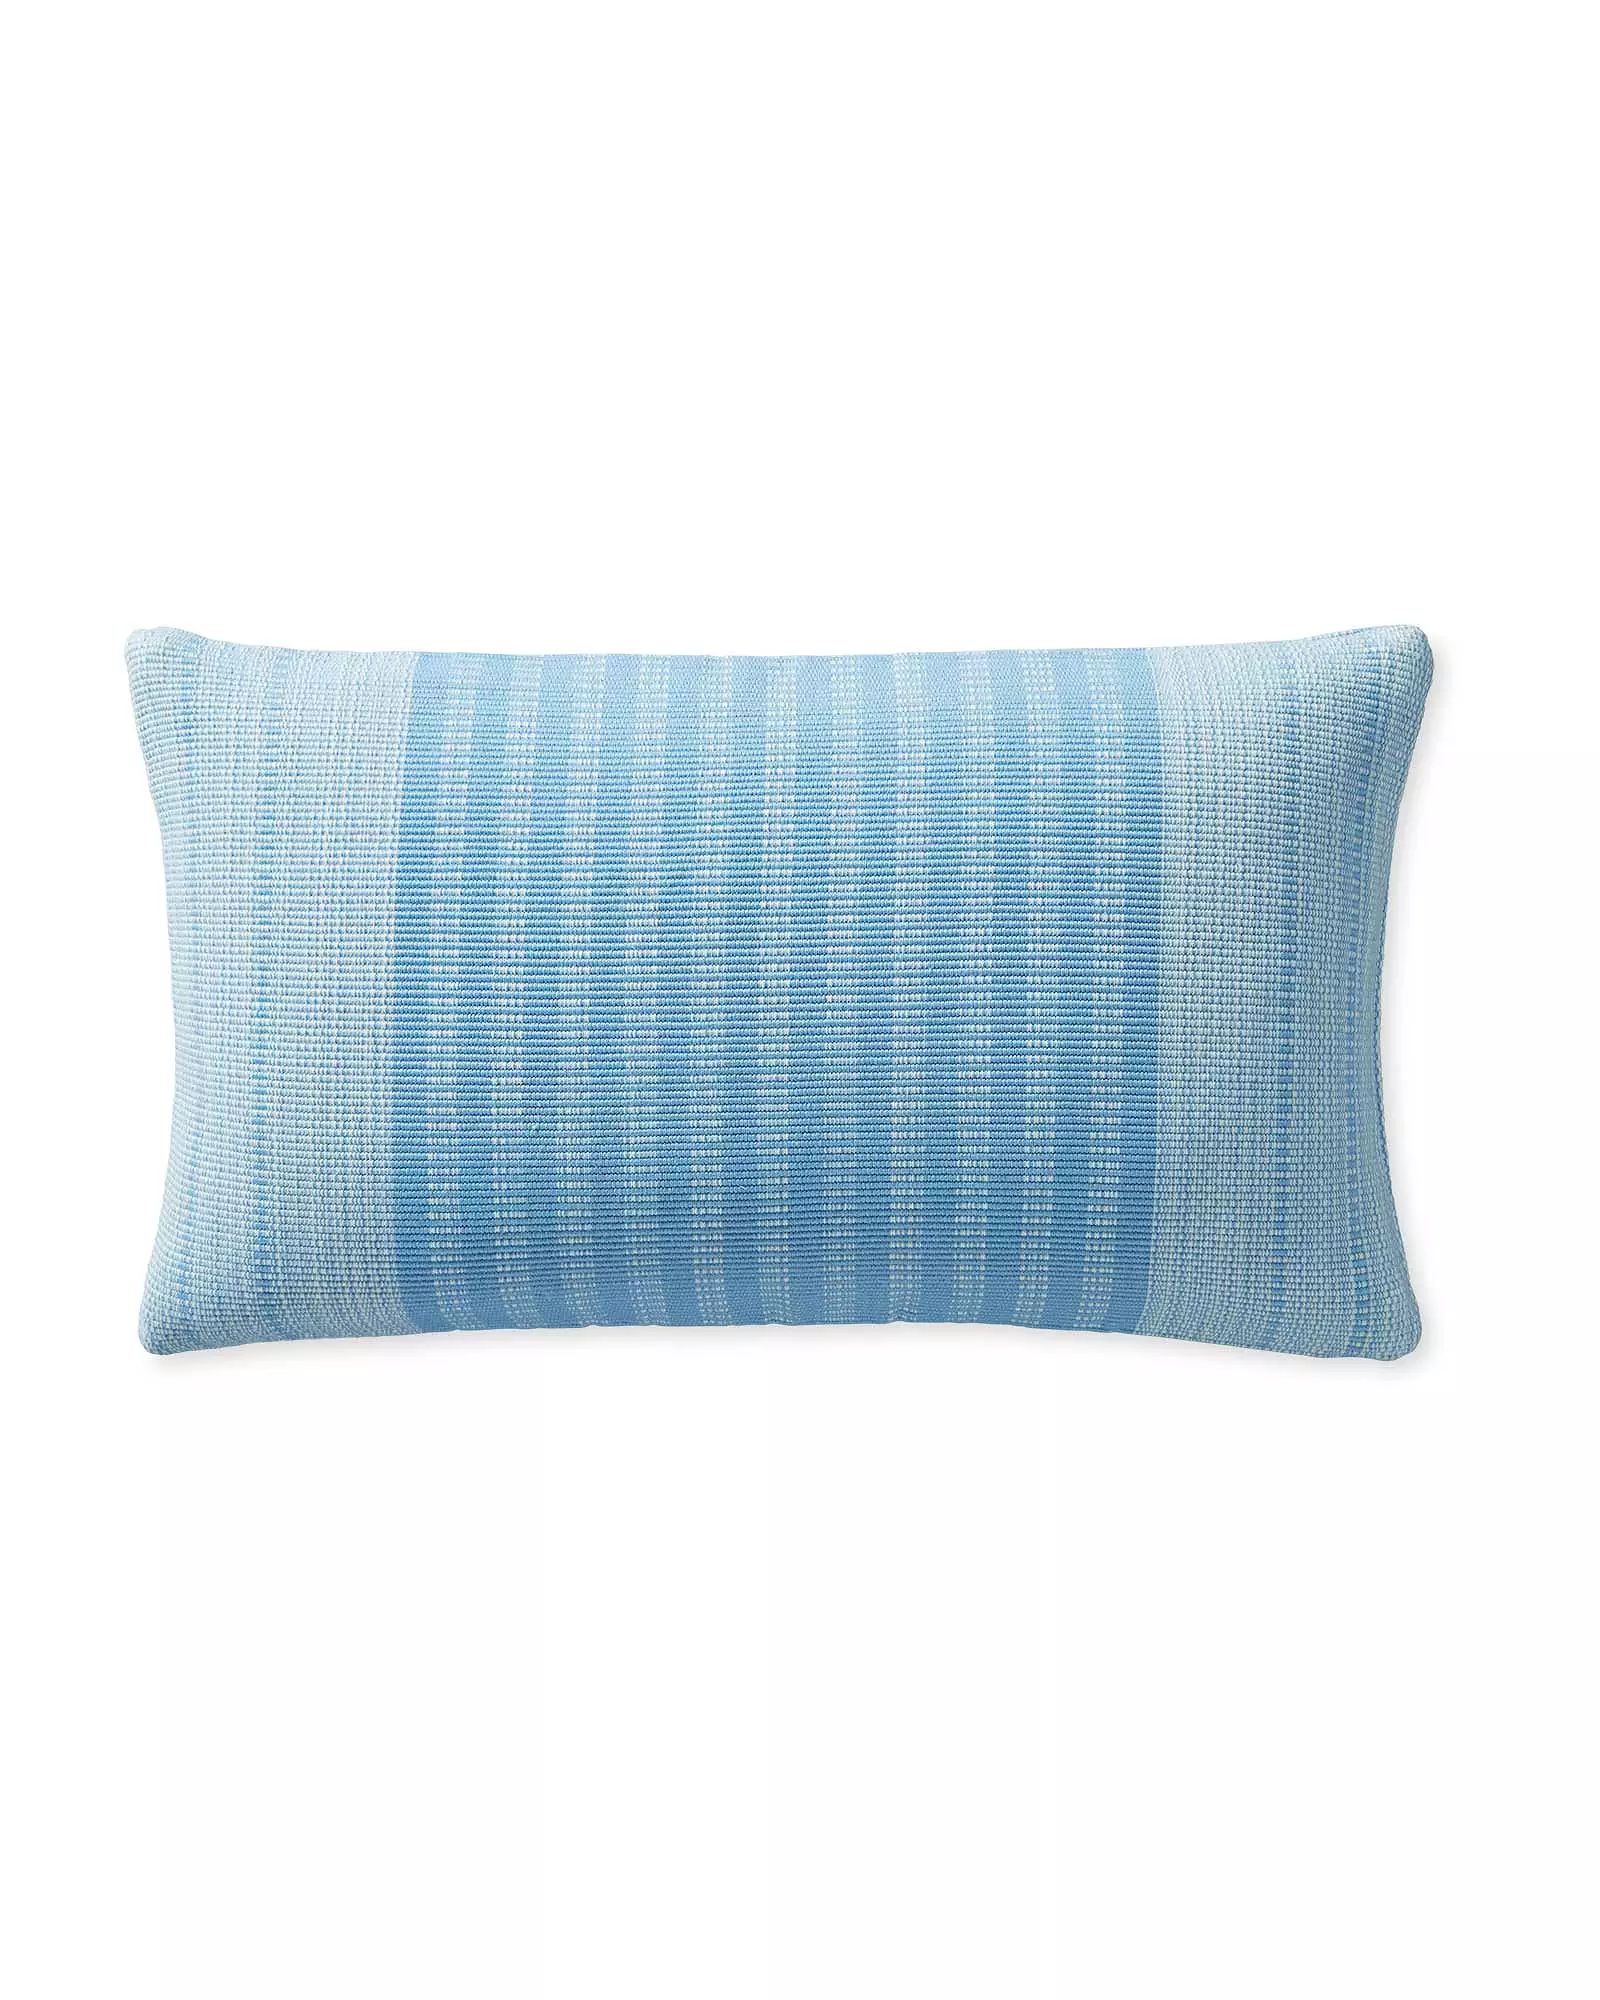 Zuma Pillow Cover | Serena and Lily